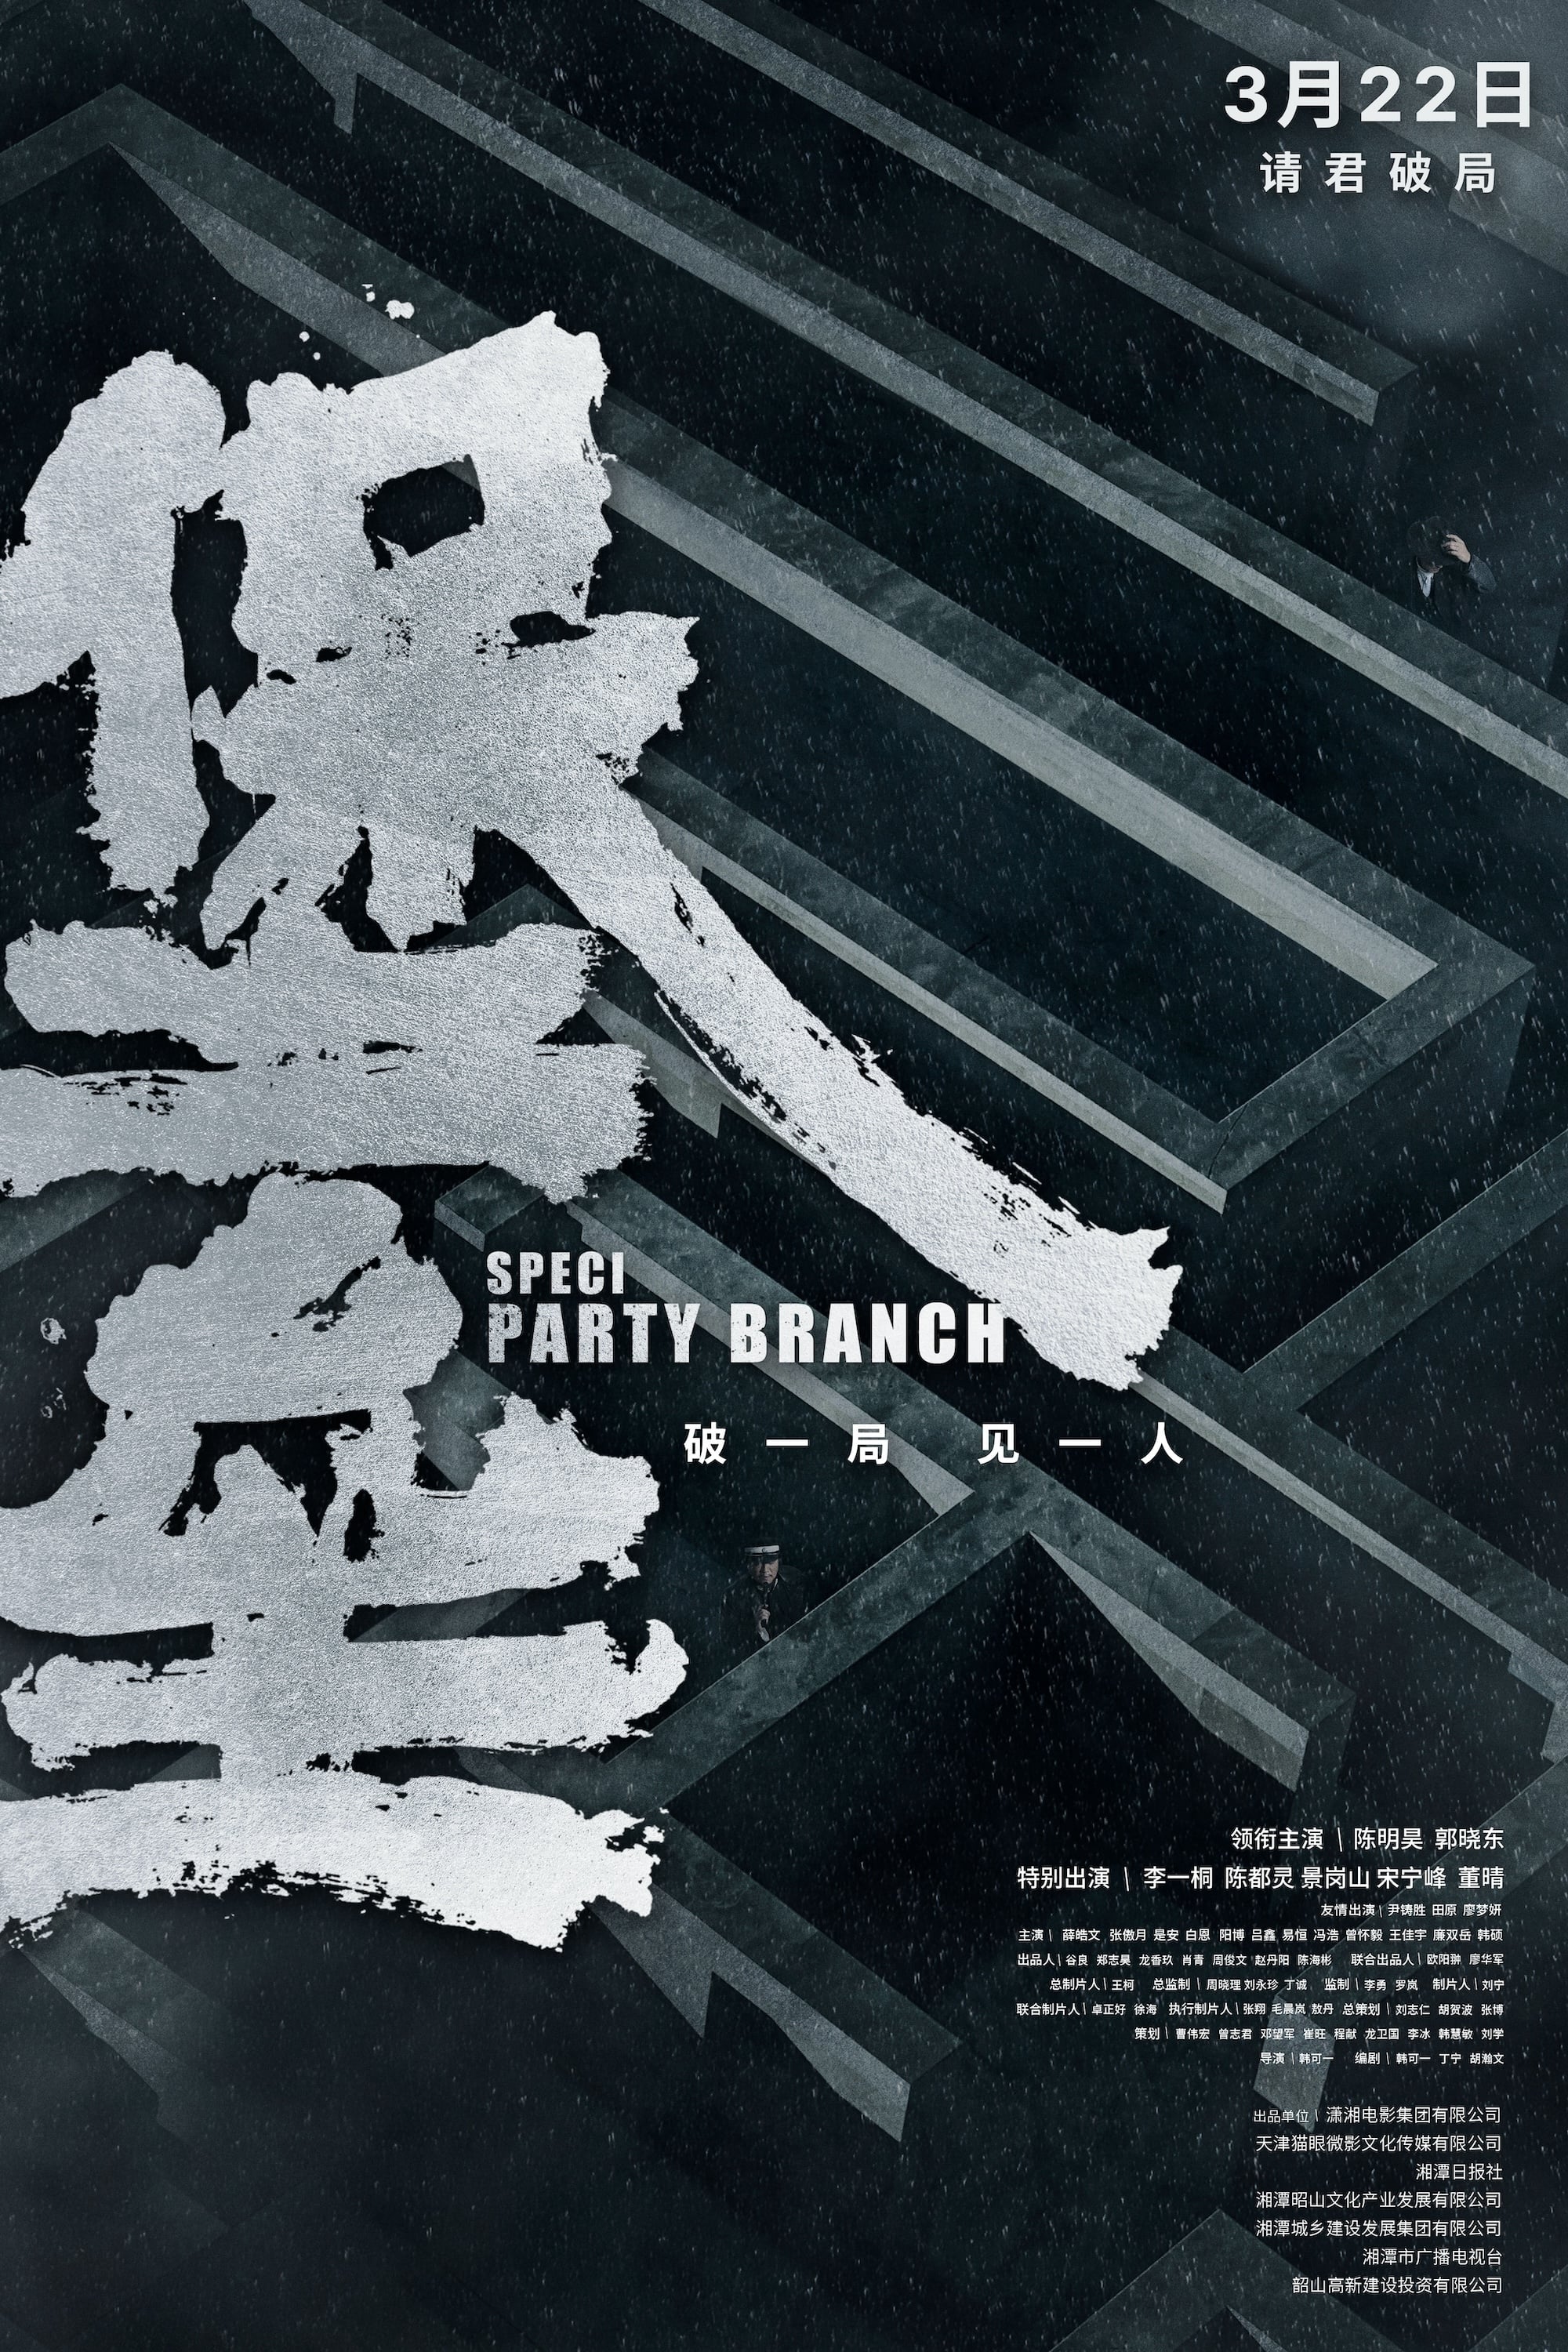 Special Party Branch